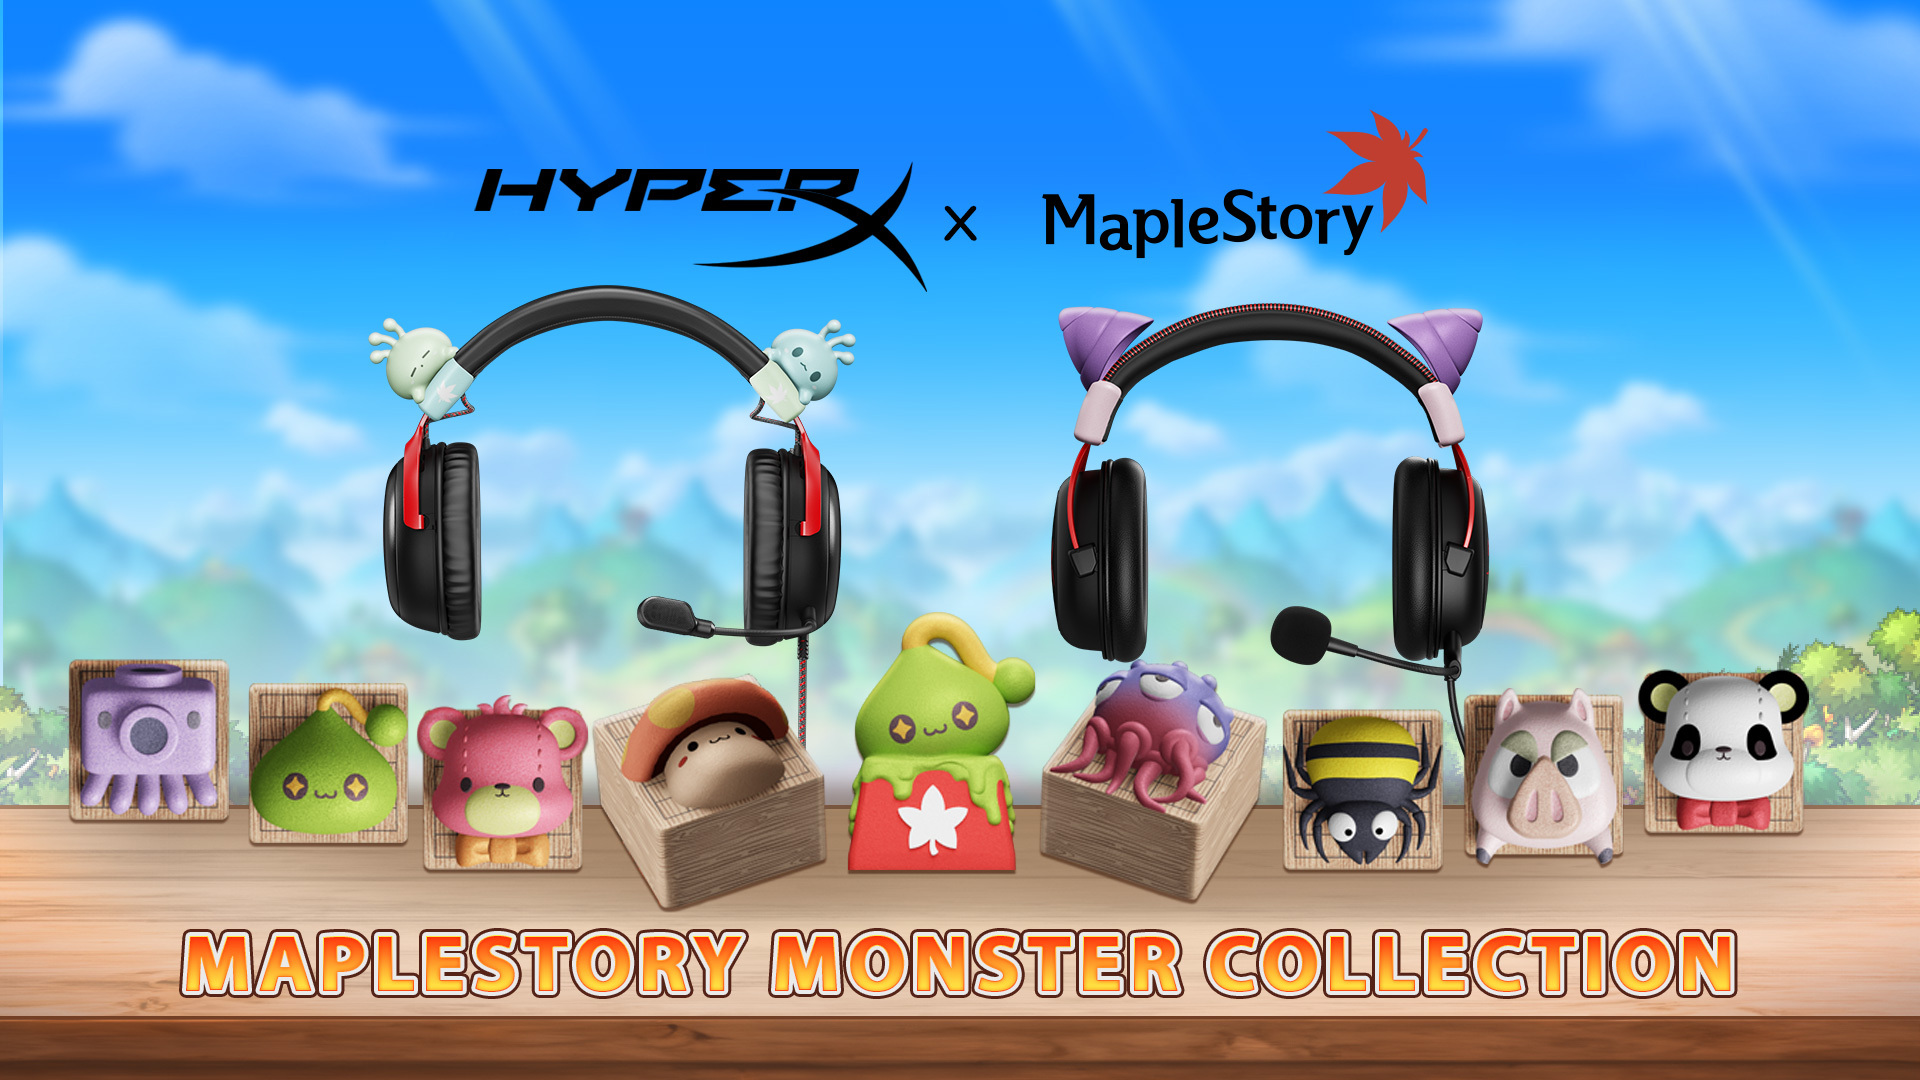 HyperX MapleStory Monster Collection